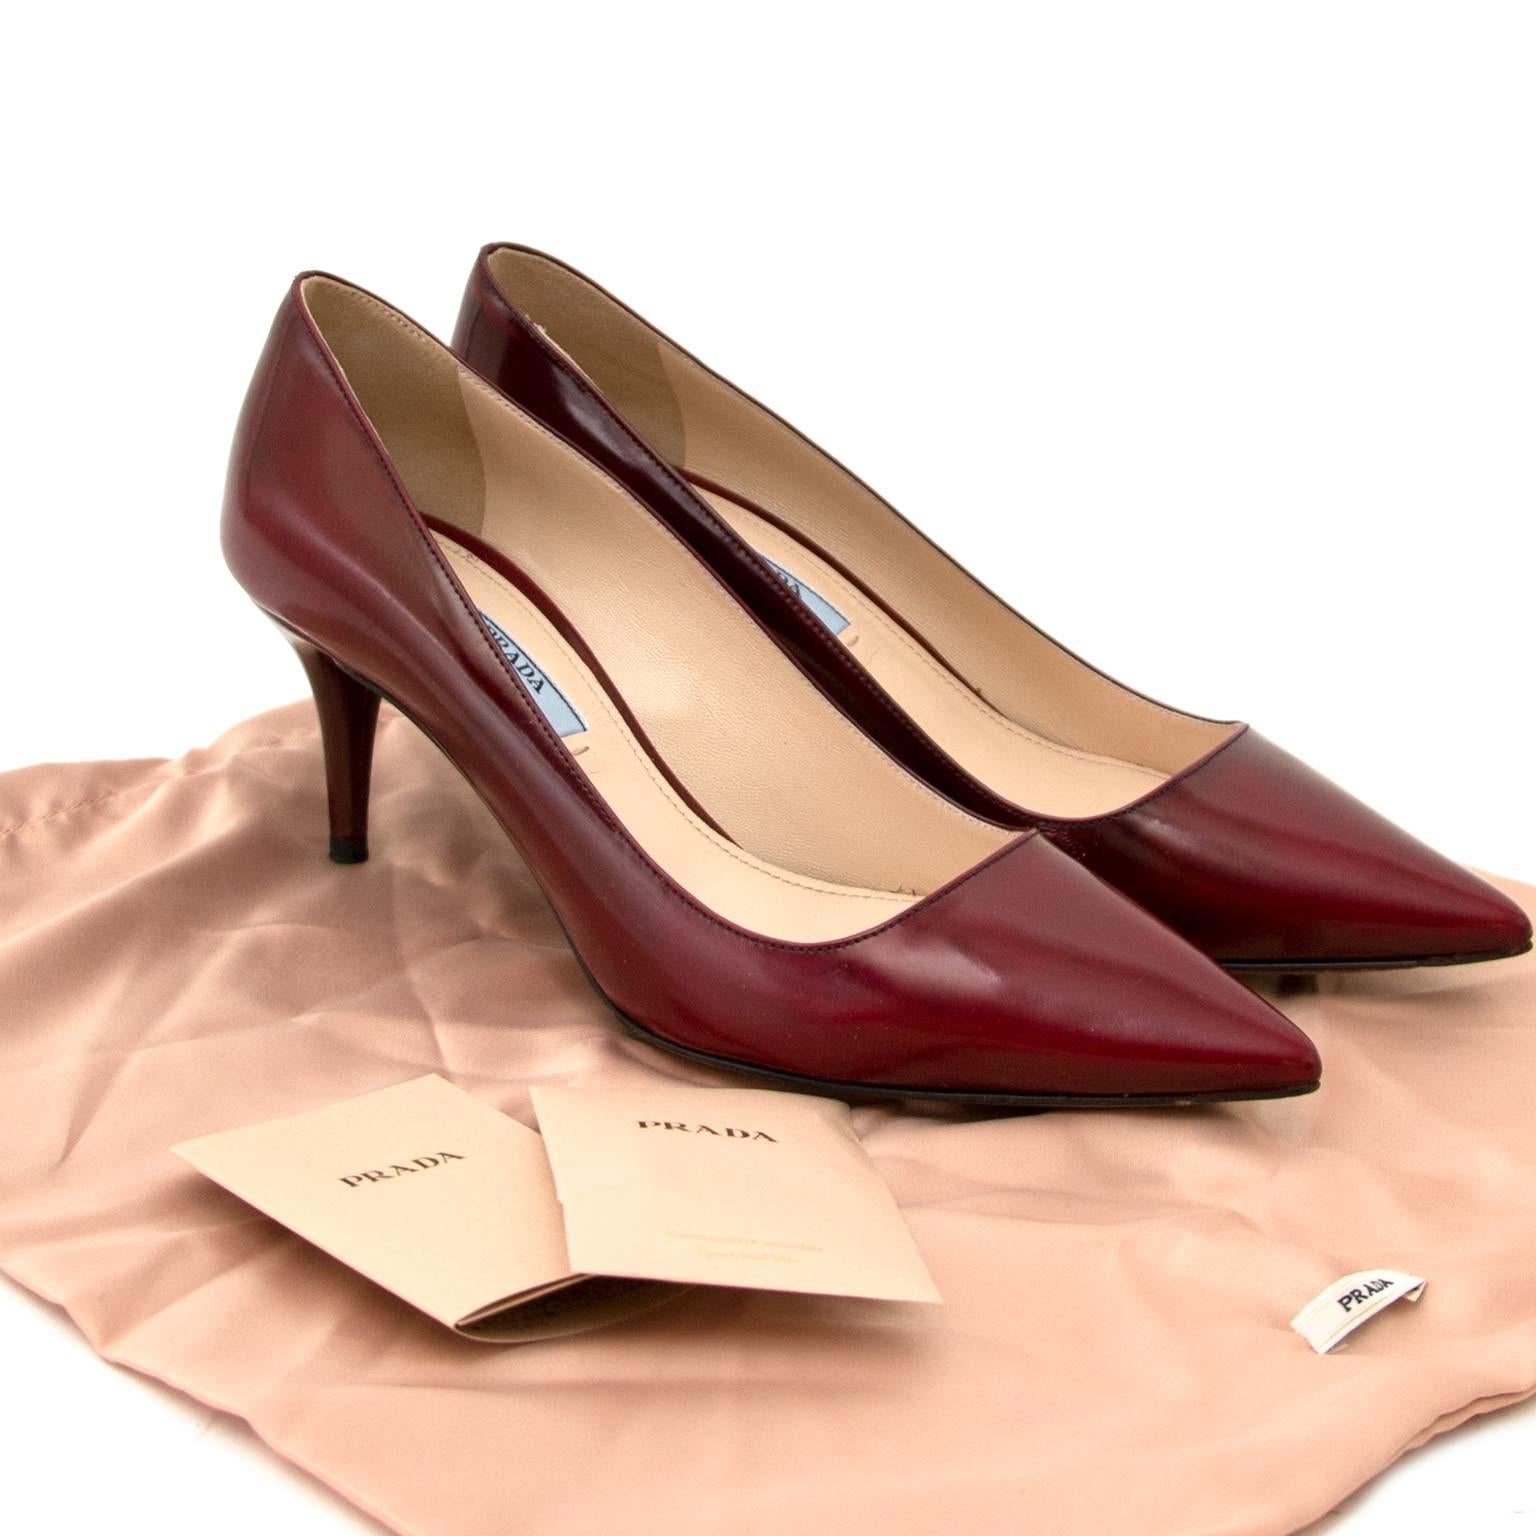 Very good condition

Prada Bordeaux Kitten Heels

Meeooow! The kitten heel is back and hotter than ever! The name 'kitten heel' came about because the style was considered a training heel for 'kittens' a.k.a. young girls not ready for grown women's